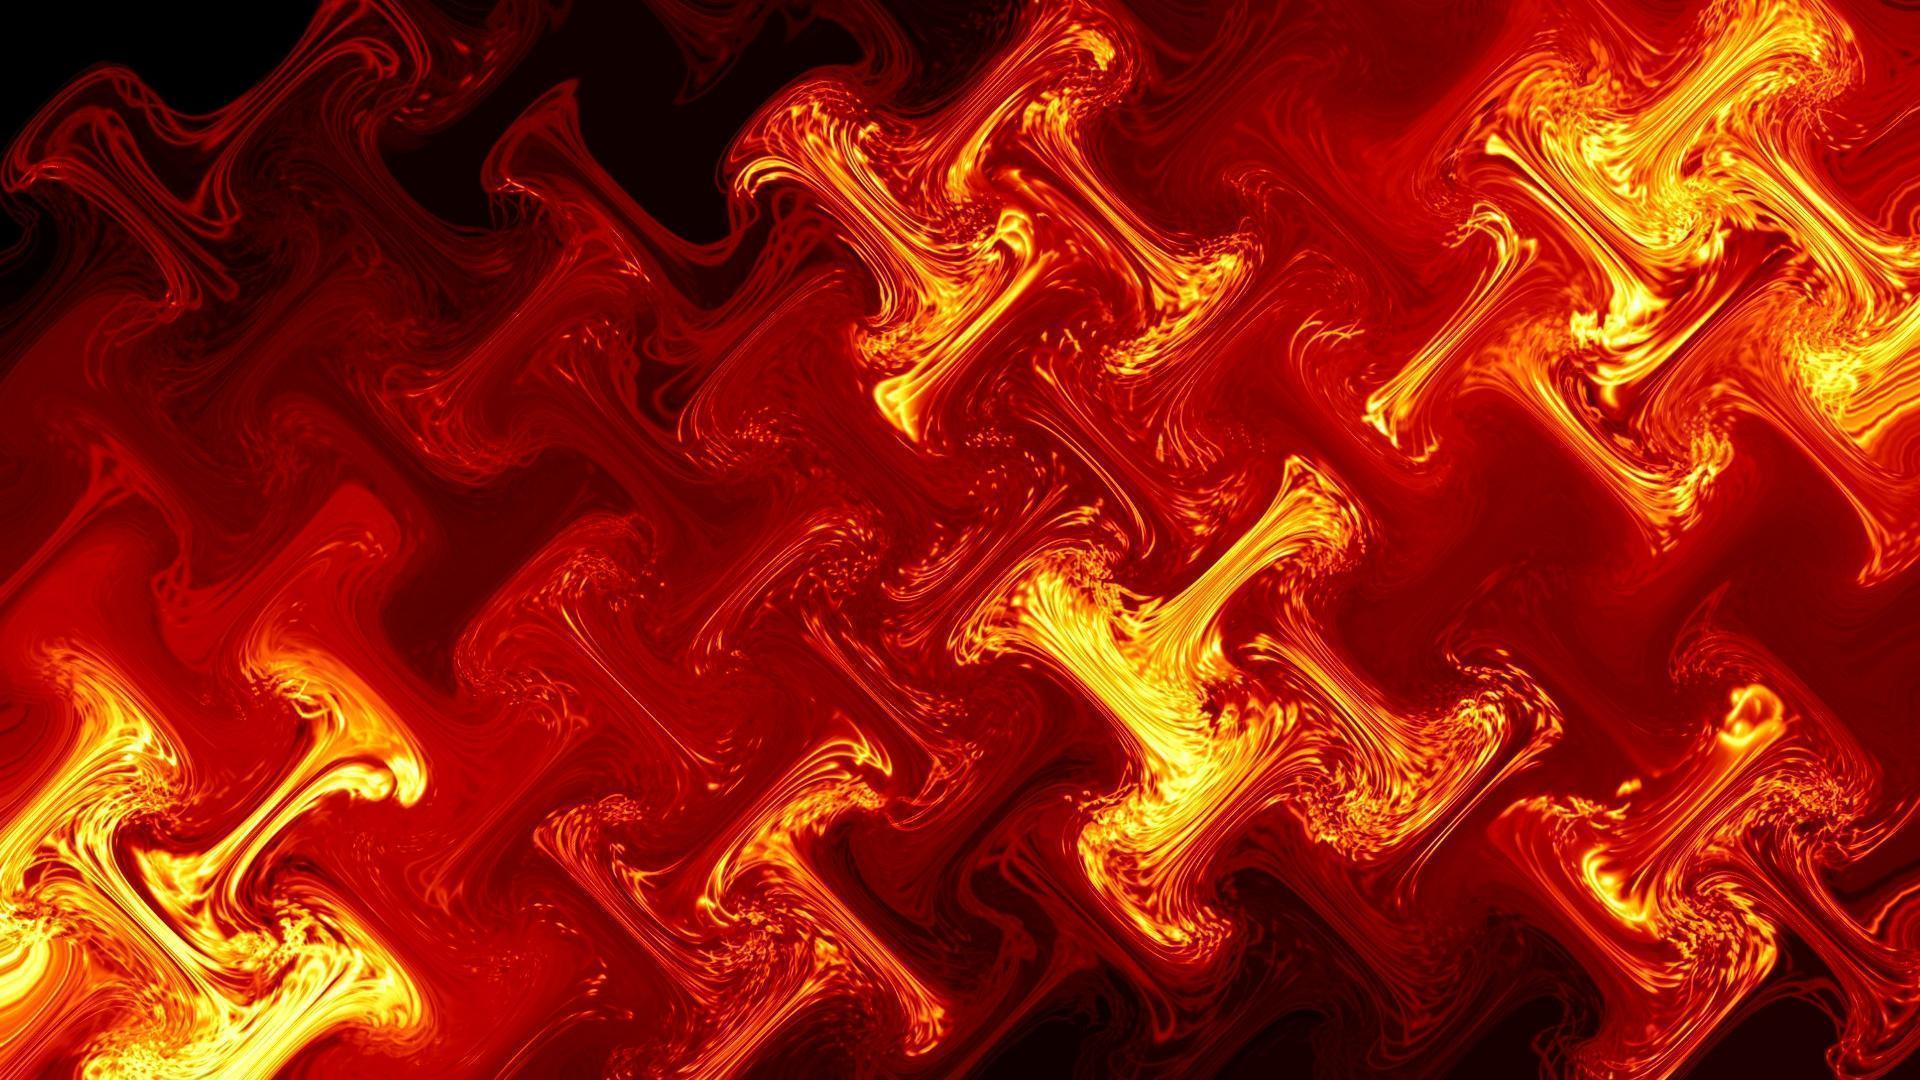 Red Flames Backgrounds - Wallpaper Cave